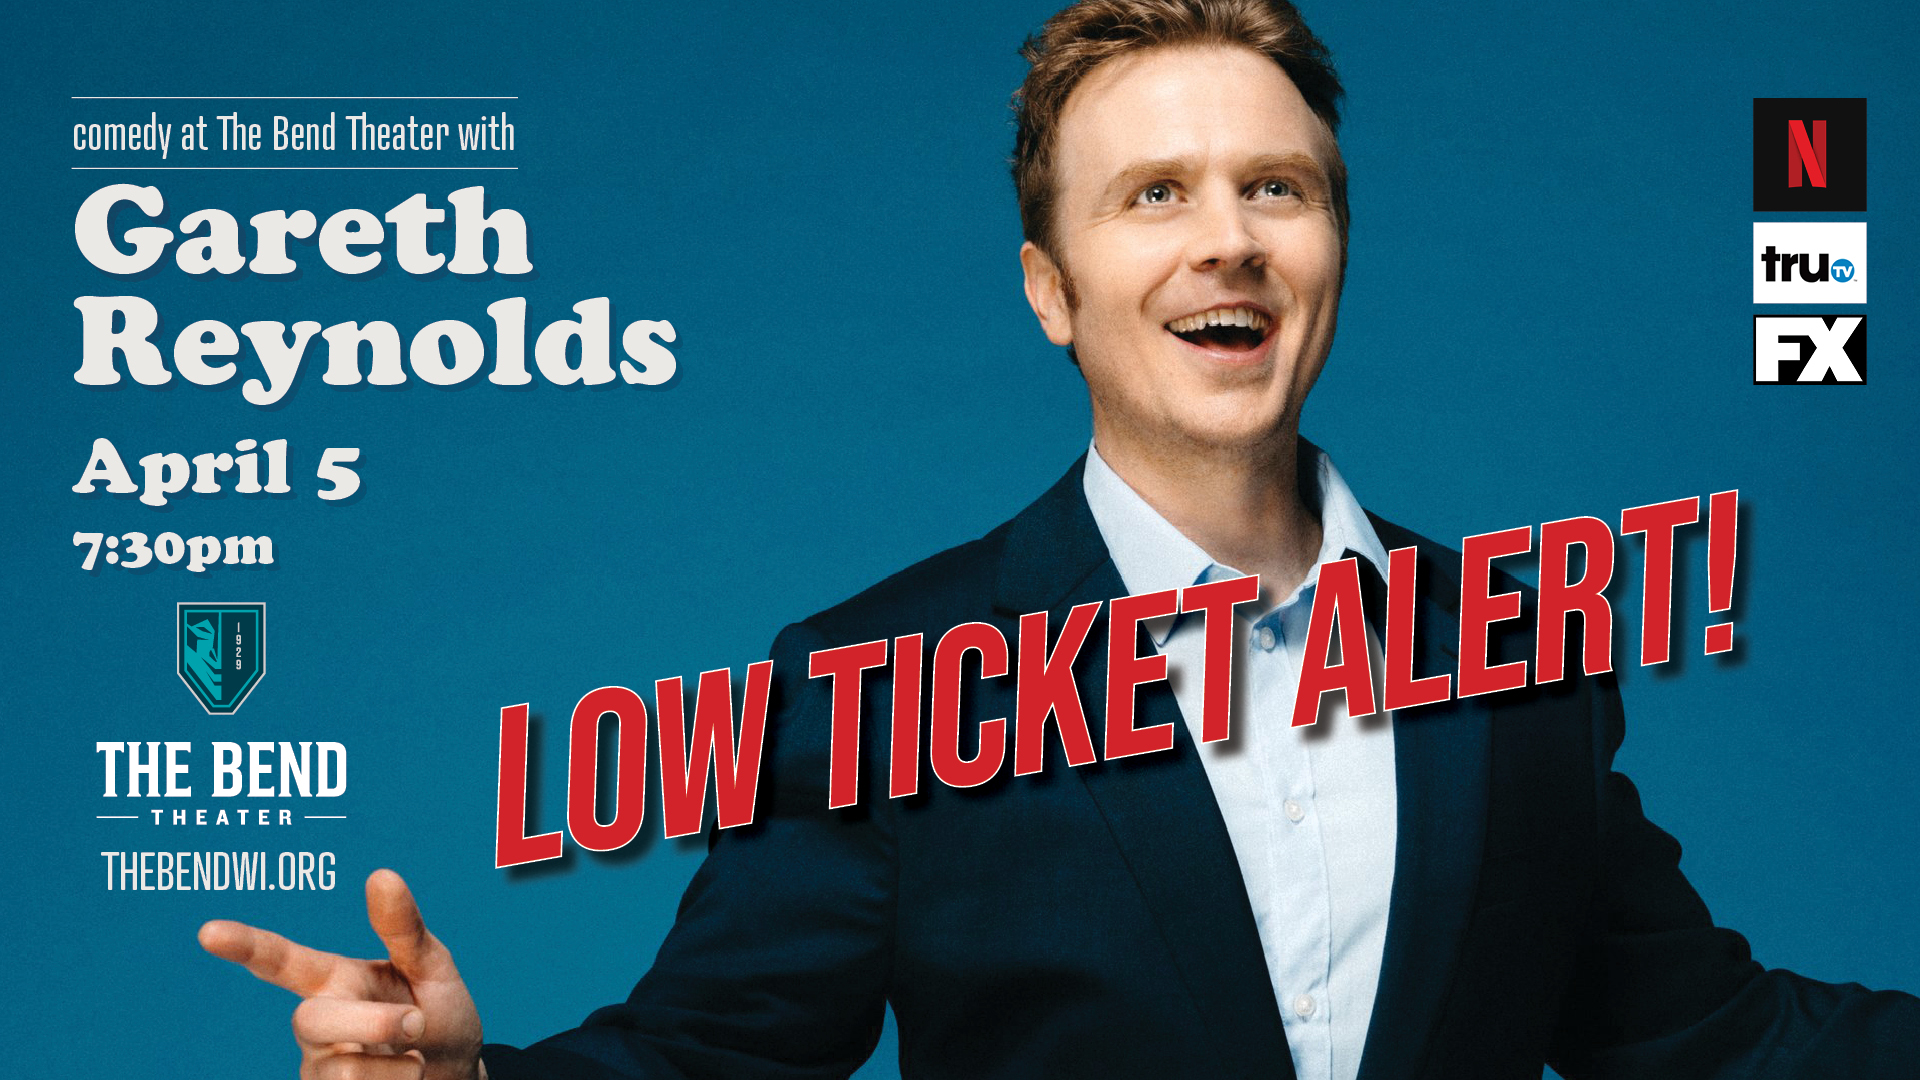 Comedy Nights at The Bend Theater with Gareth Reynolds